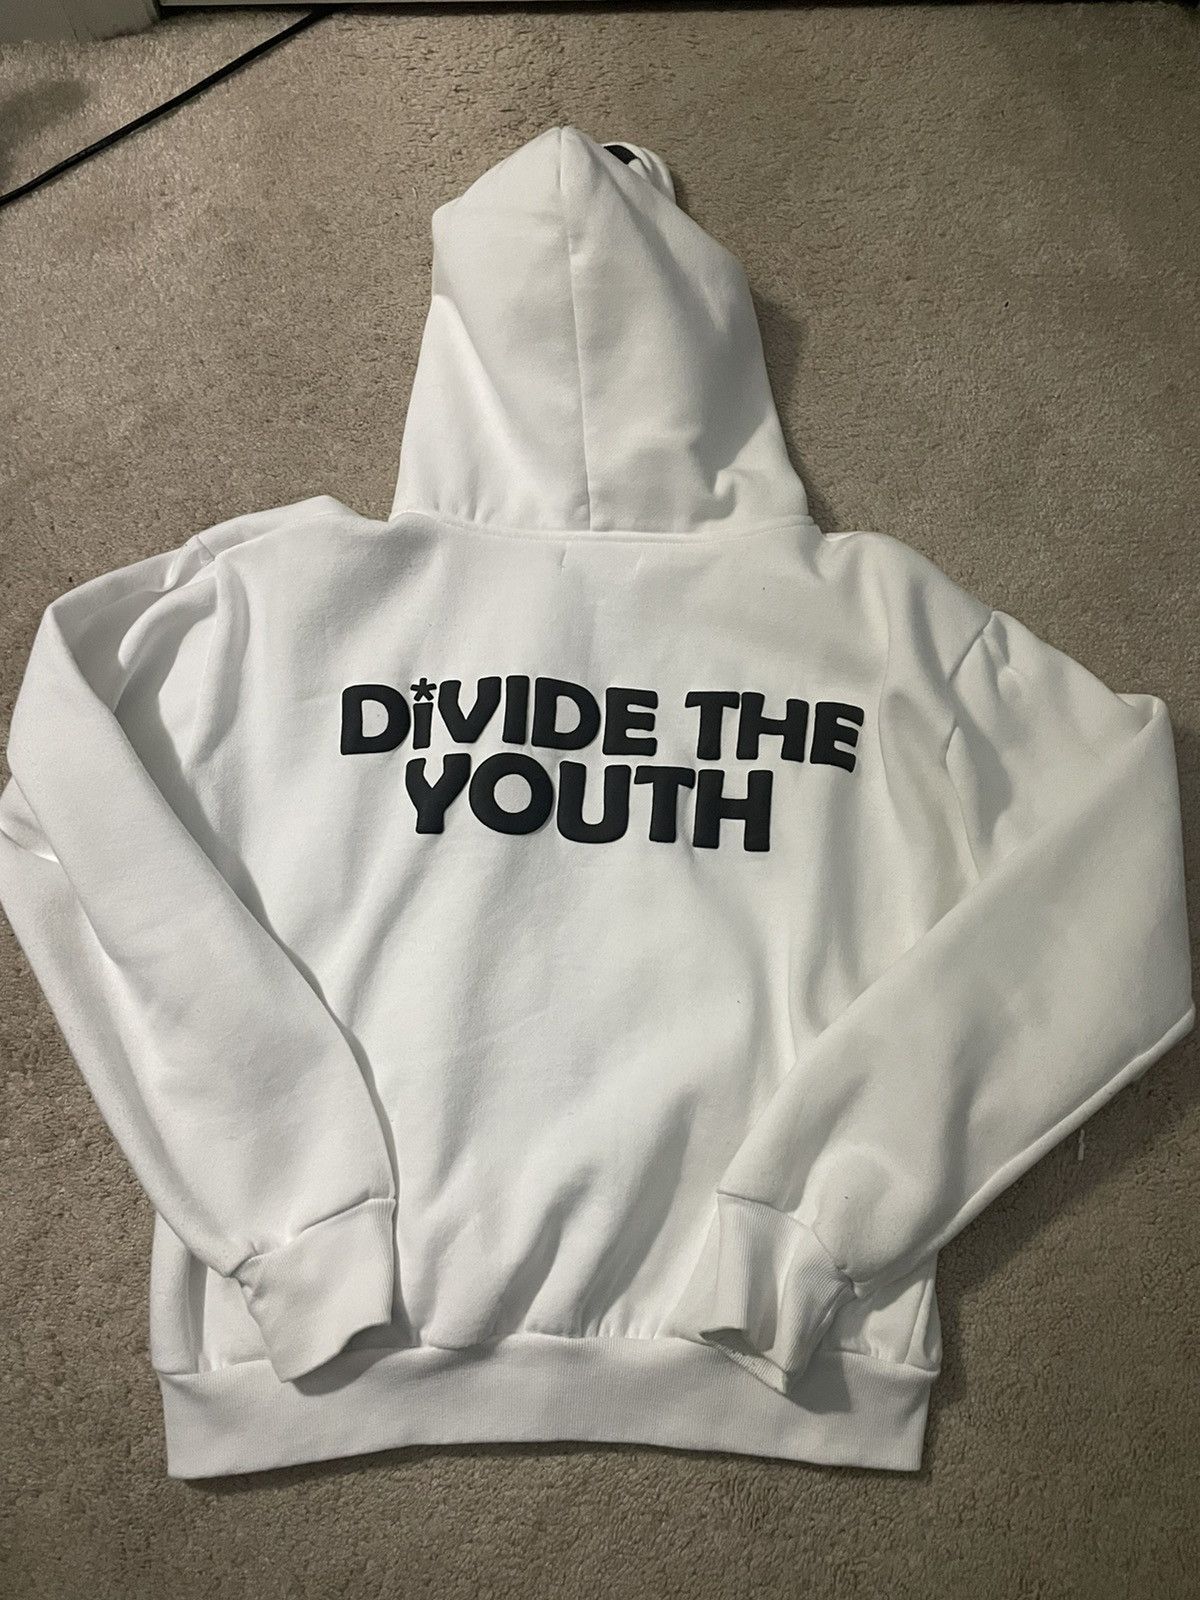 Streetwear Divide The Youth White Zip Up Hoodie Size US M / EU 48-50 / 2 - 2 Preview